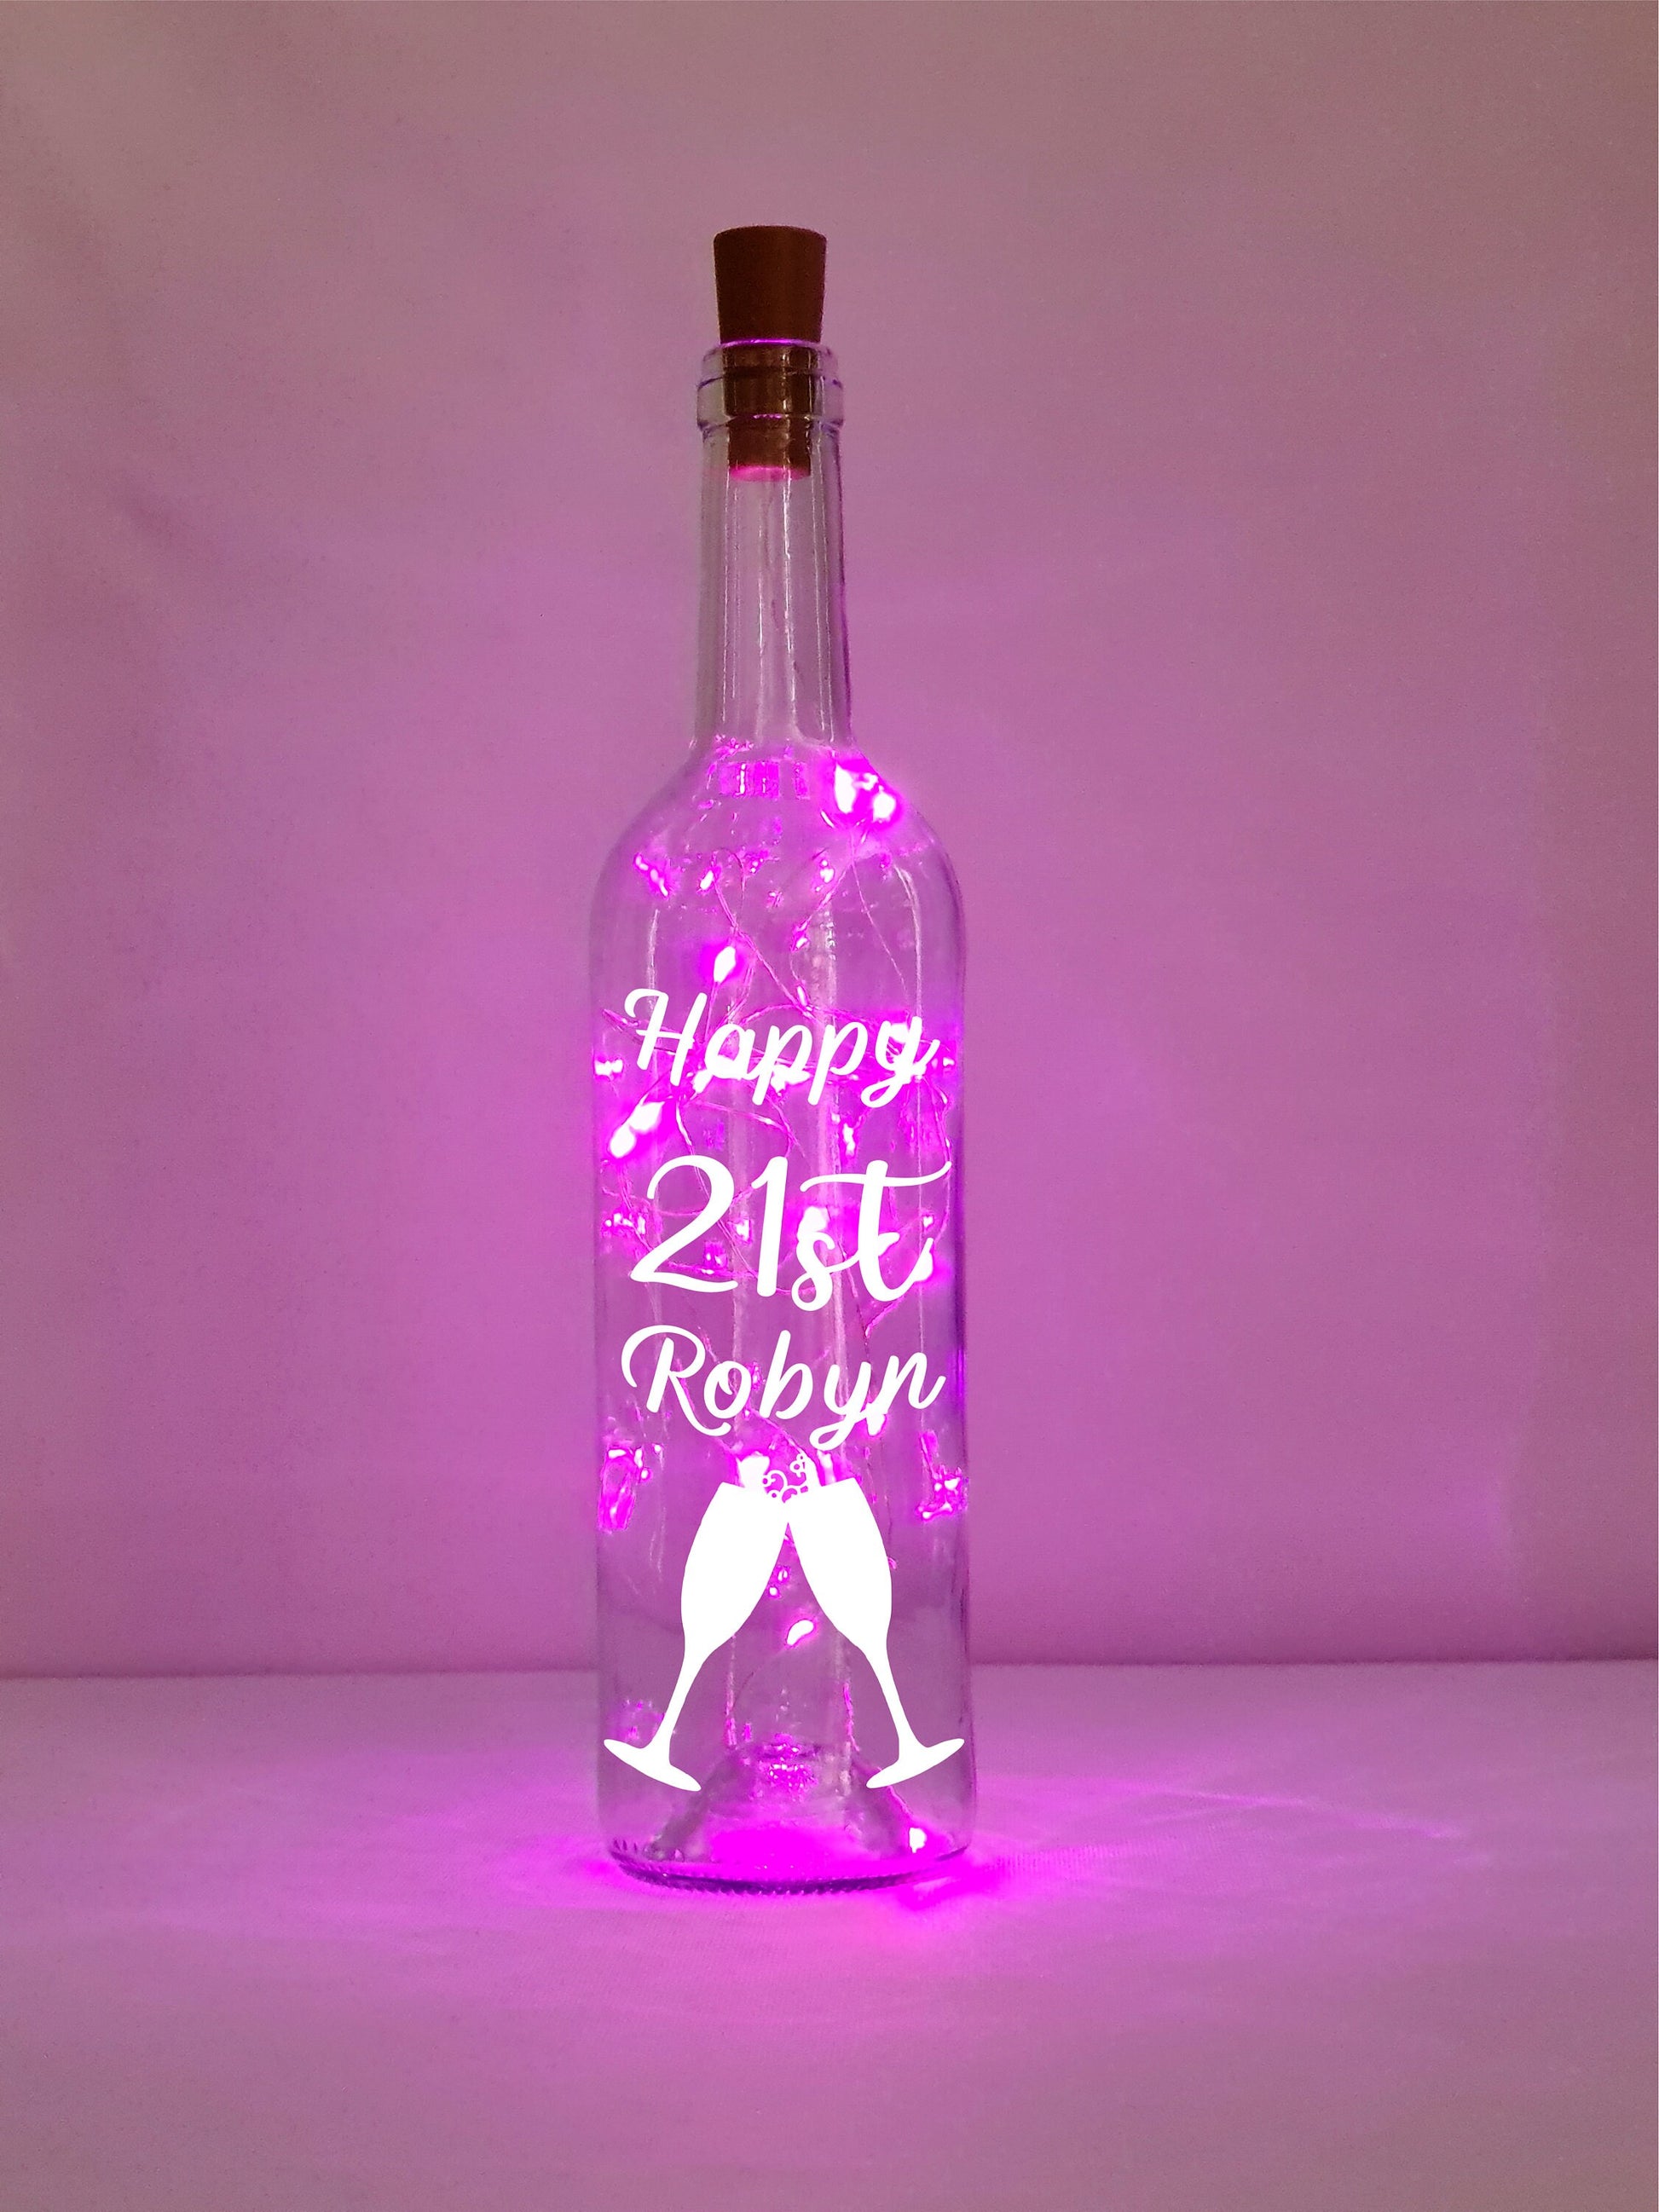 Personalised 21st Champagne Birthday Gift, Light Up Wine Bottle, Gift For Her, Gift For Him, Sister Present, Daughter, White, Pink, Blue